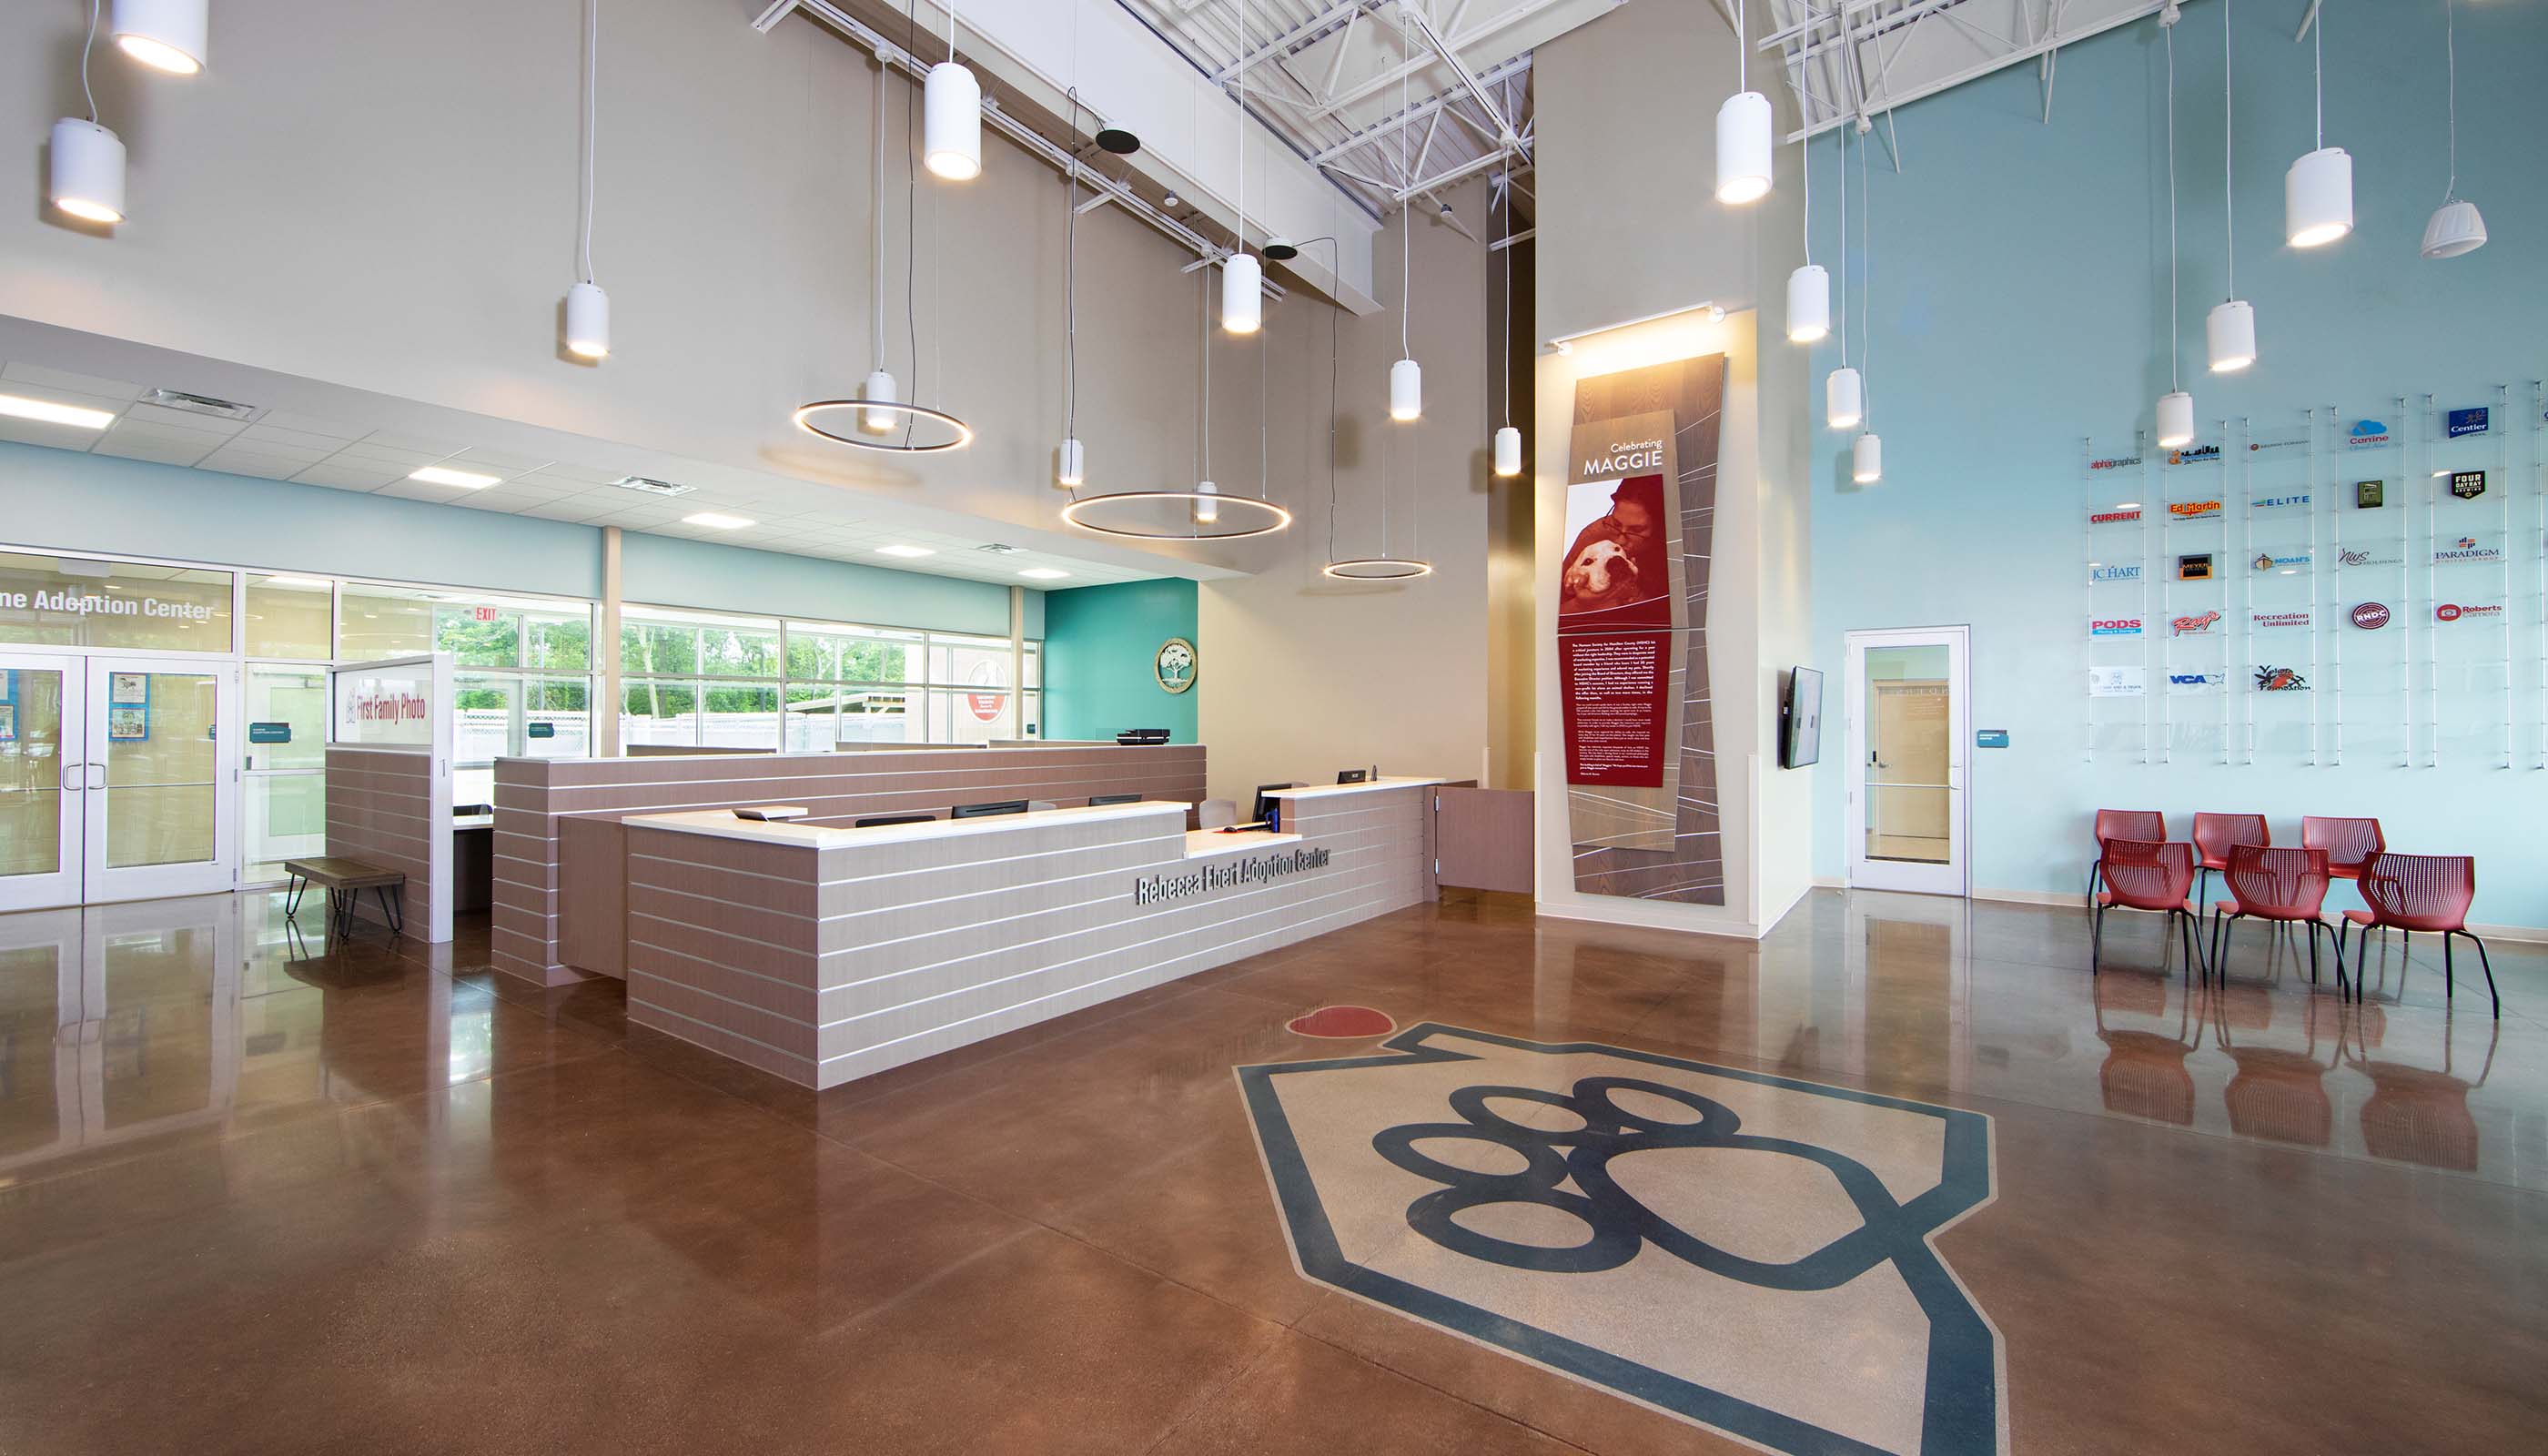 Humane Society of Hamilton County finds forever home in Fishers | Curran  Architecture